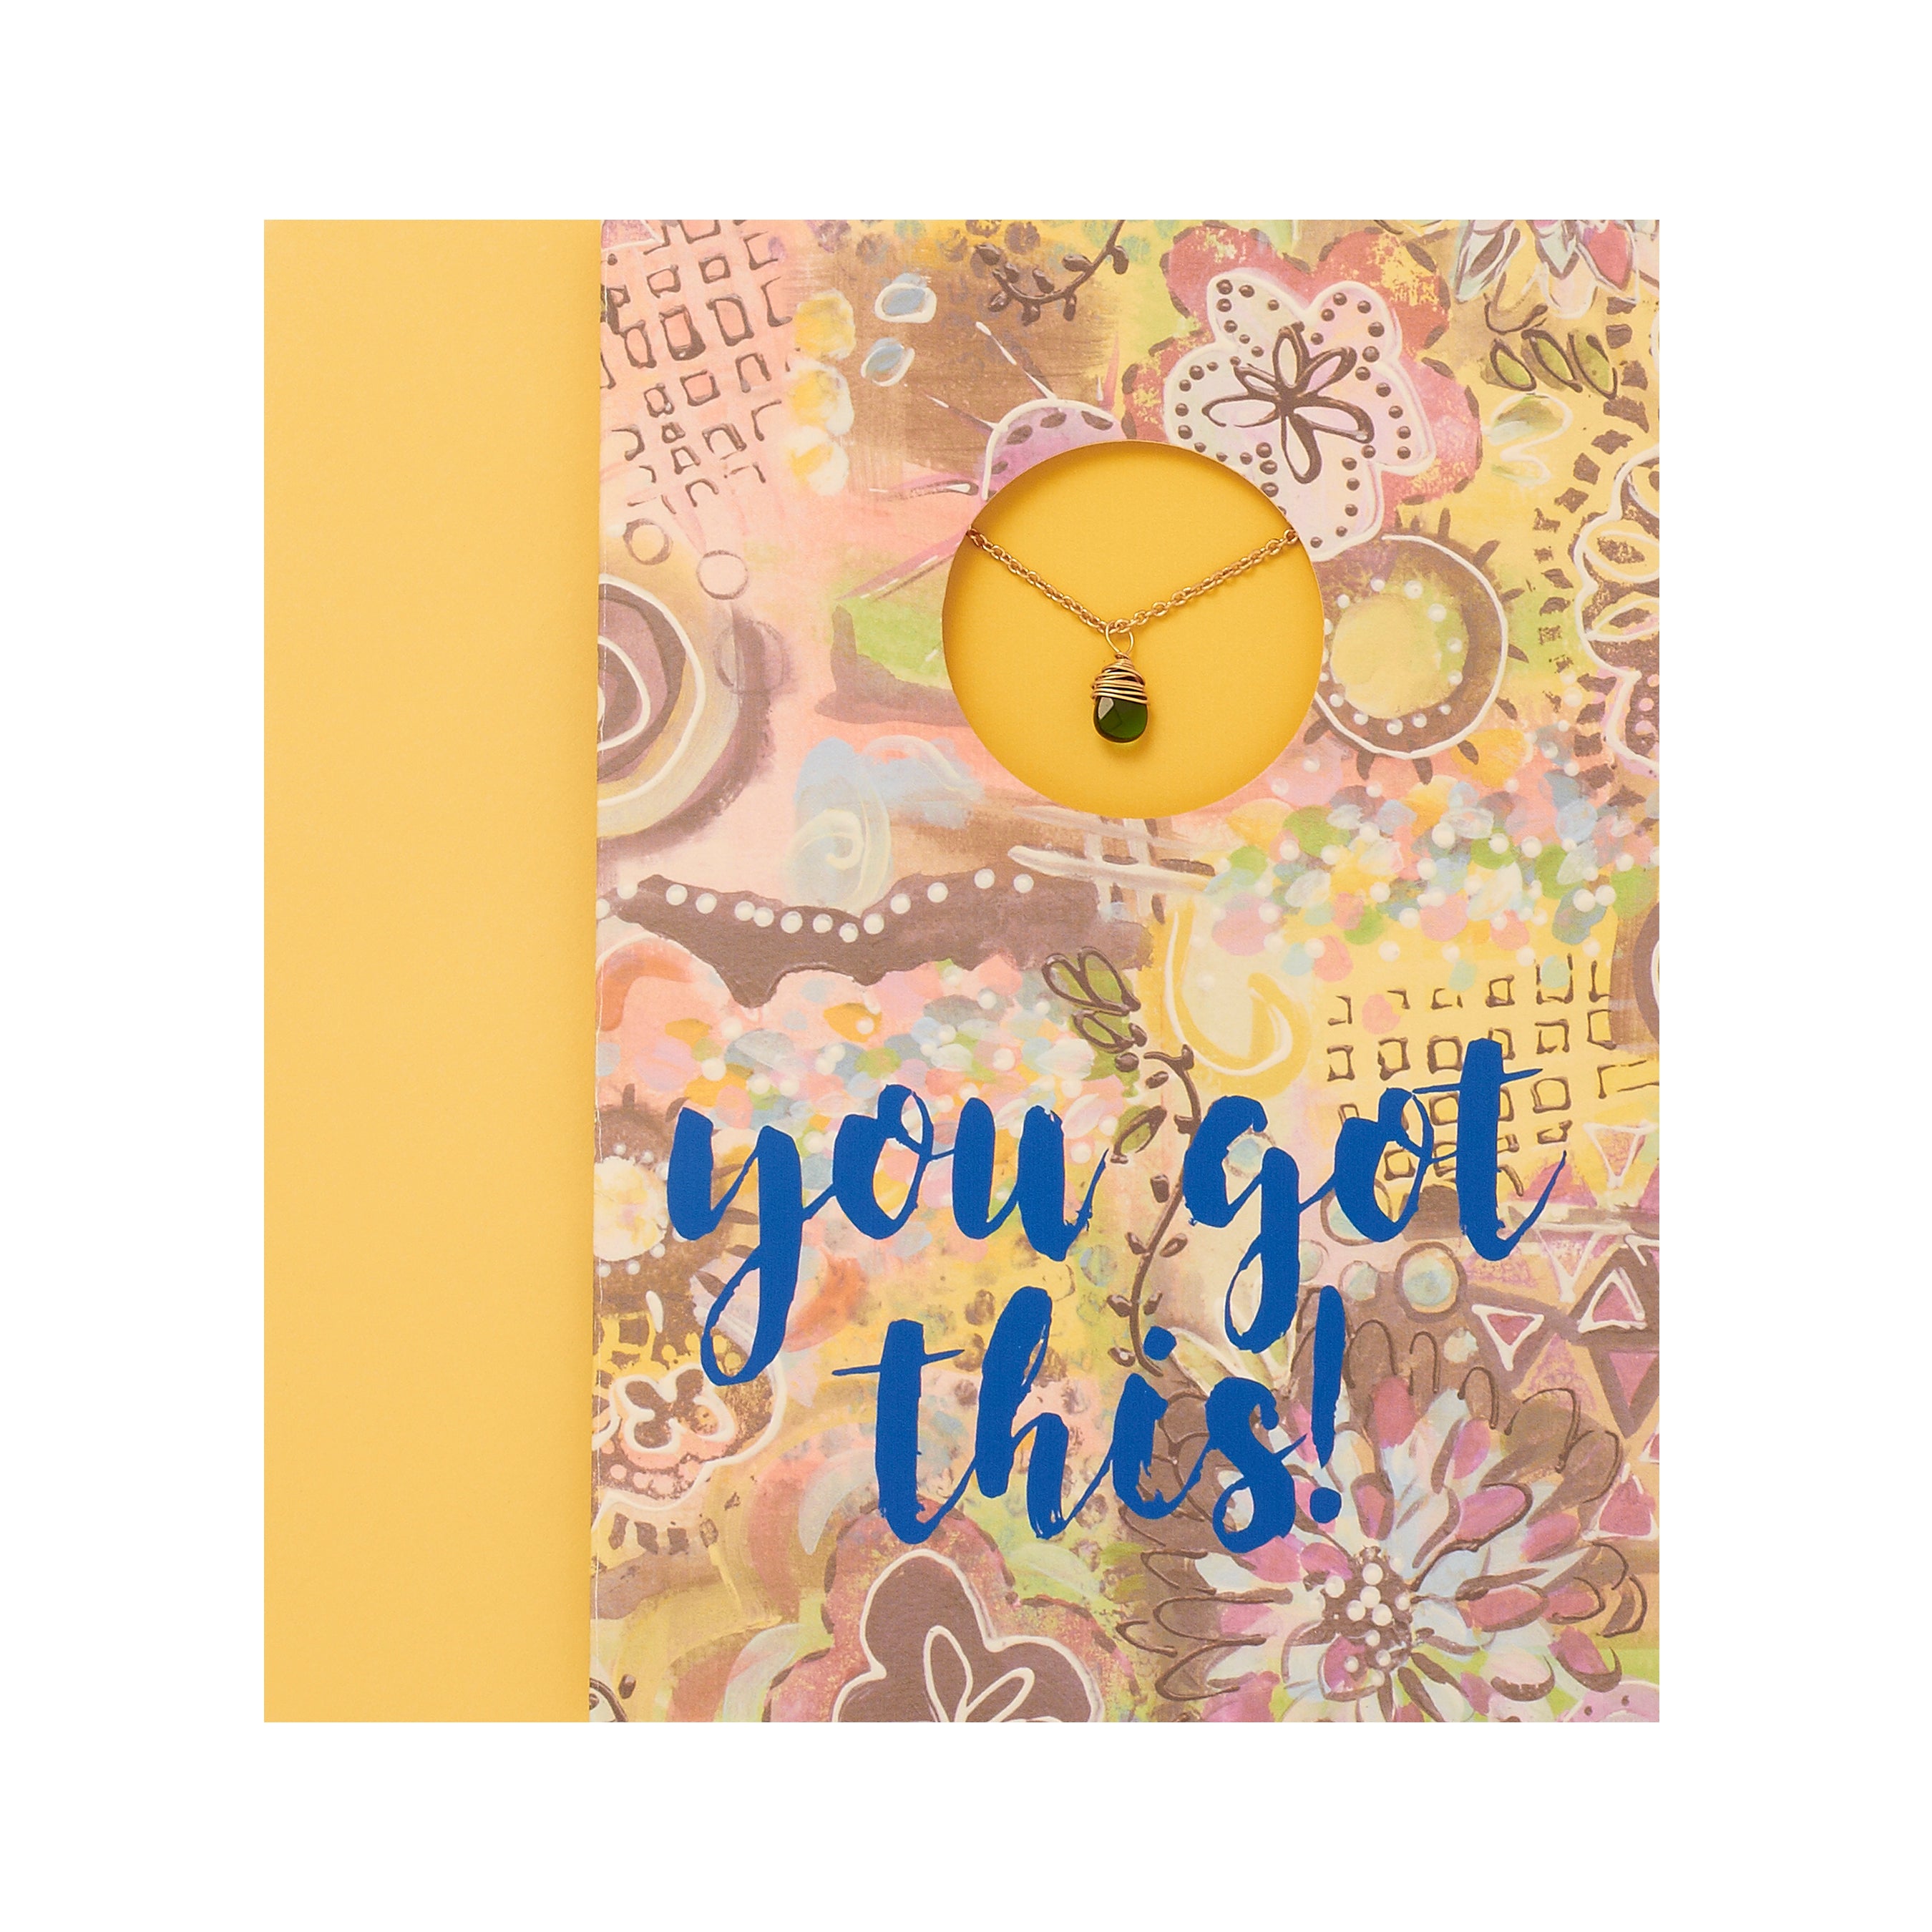 4 Pack of Greeting Cards With Necklace-"You Got This"